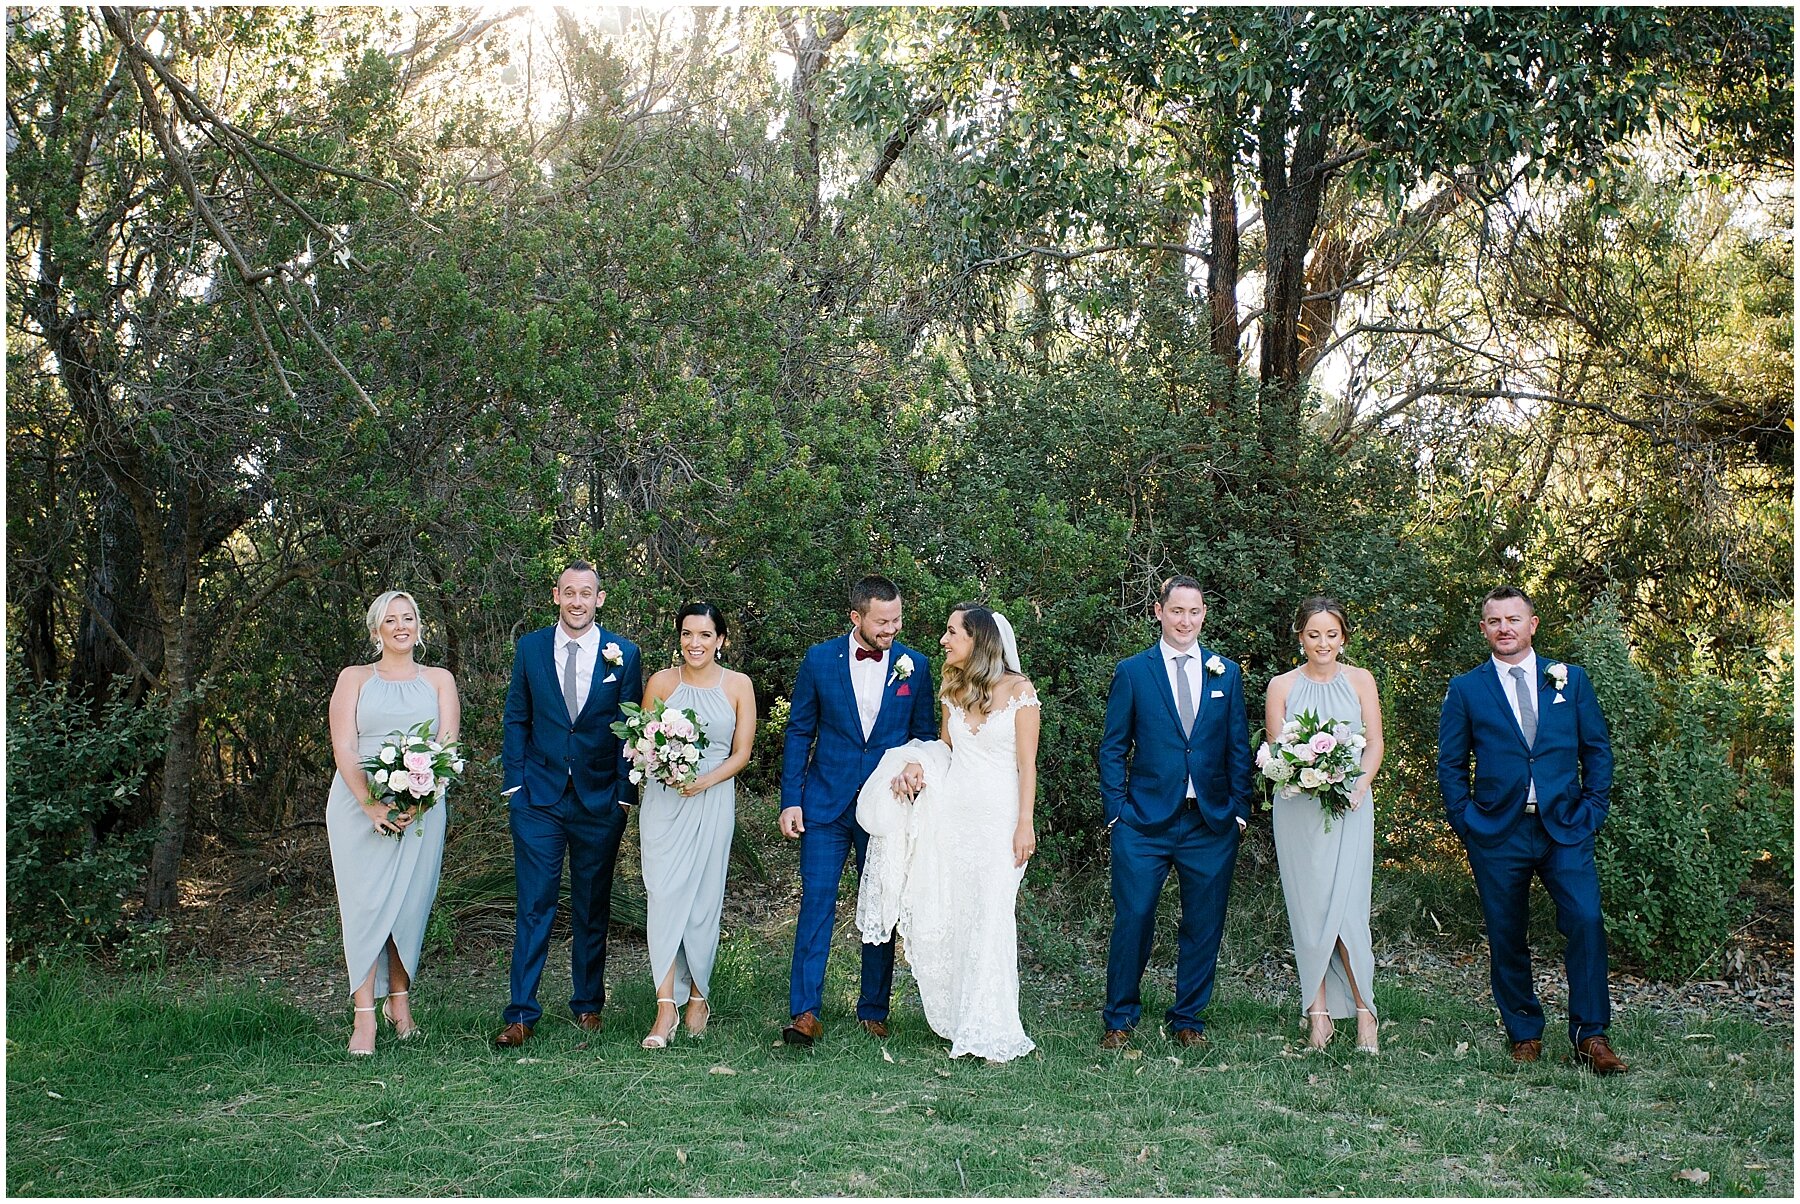 Bridal Party in Kings Park | Perth Wedding Photography